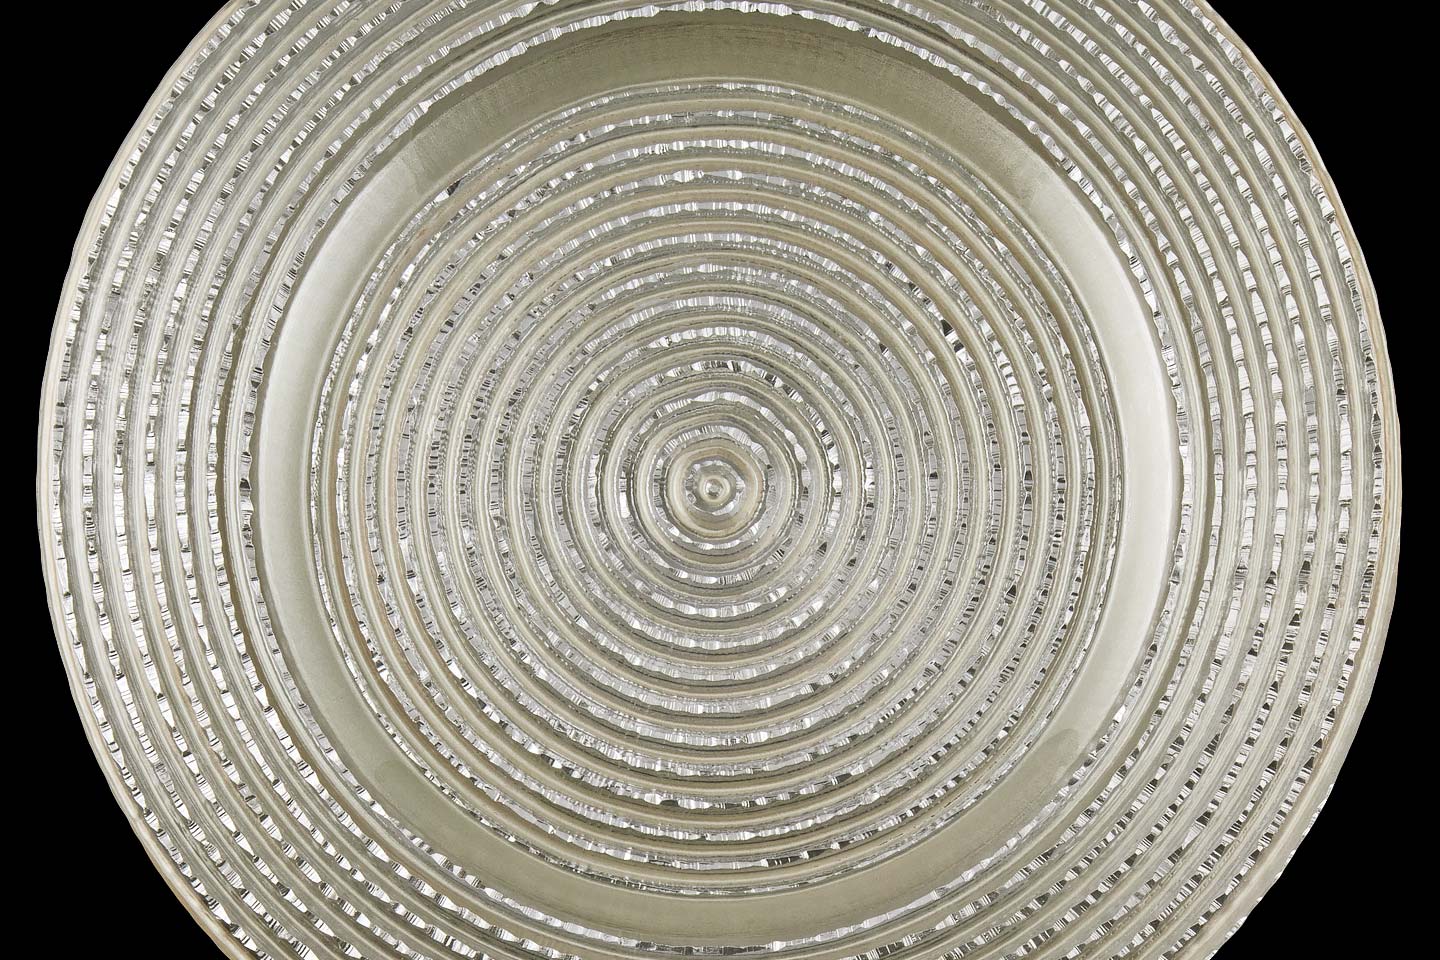 the silver pearl starlight charger plate from mandarin orange trading company, photographed by Jacob Rosenfeld